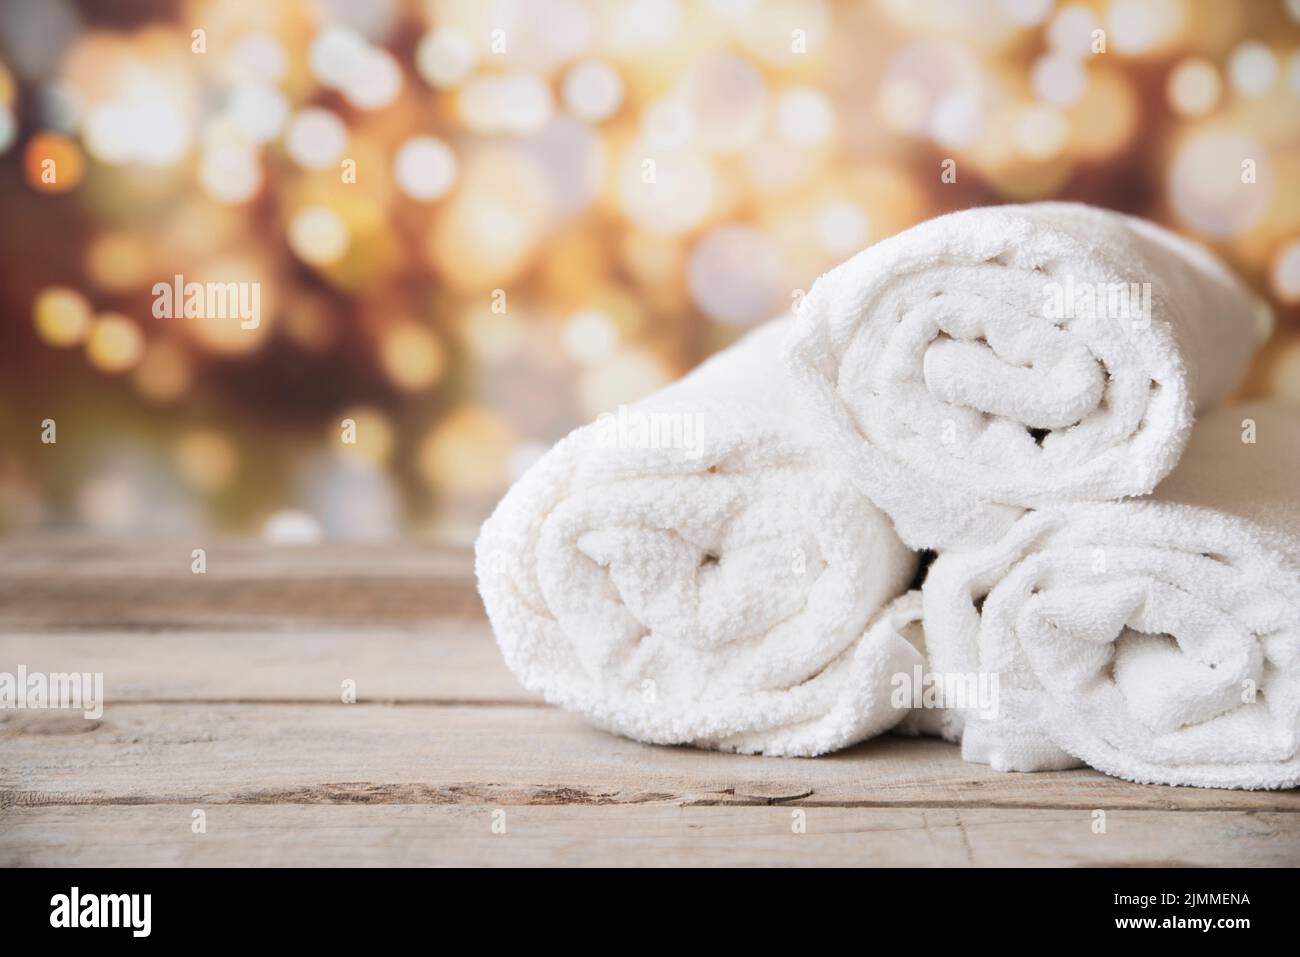 https://c8.alamy.com/comp/2JMMENA/front-view-stacked-towels-with-bokeh-background-2JMMENA.jpg